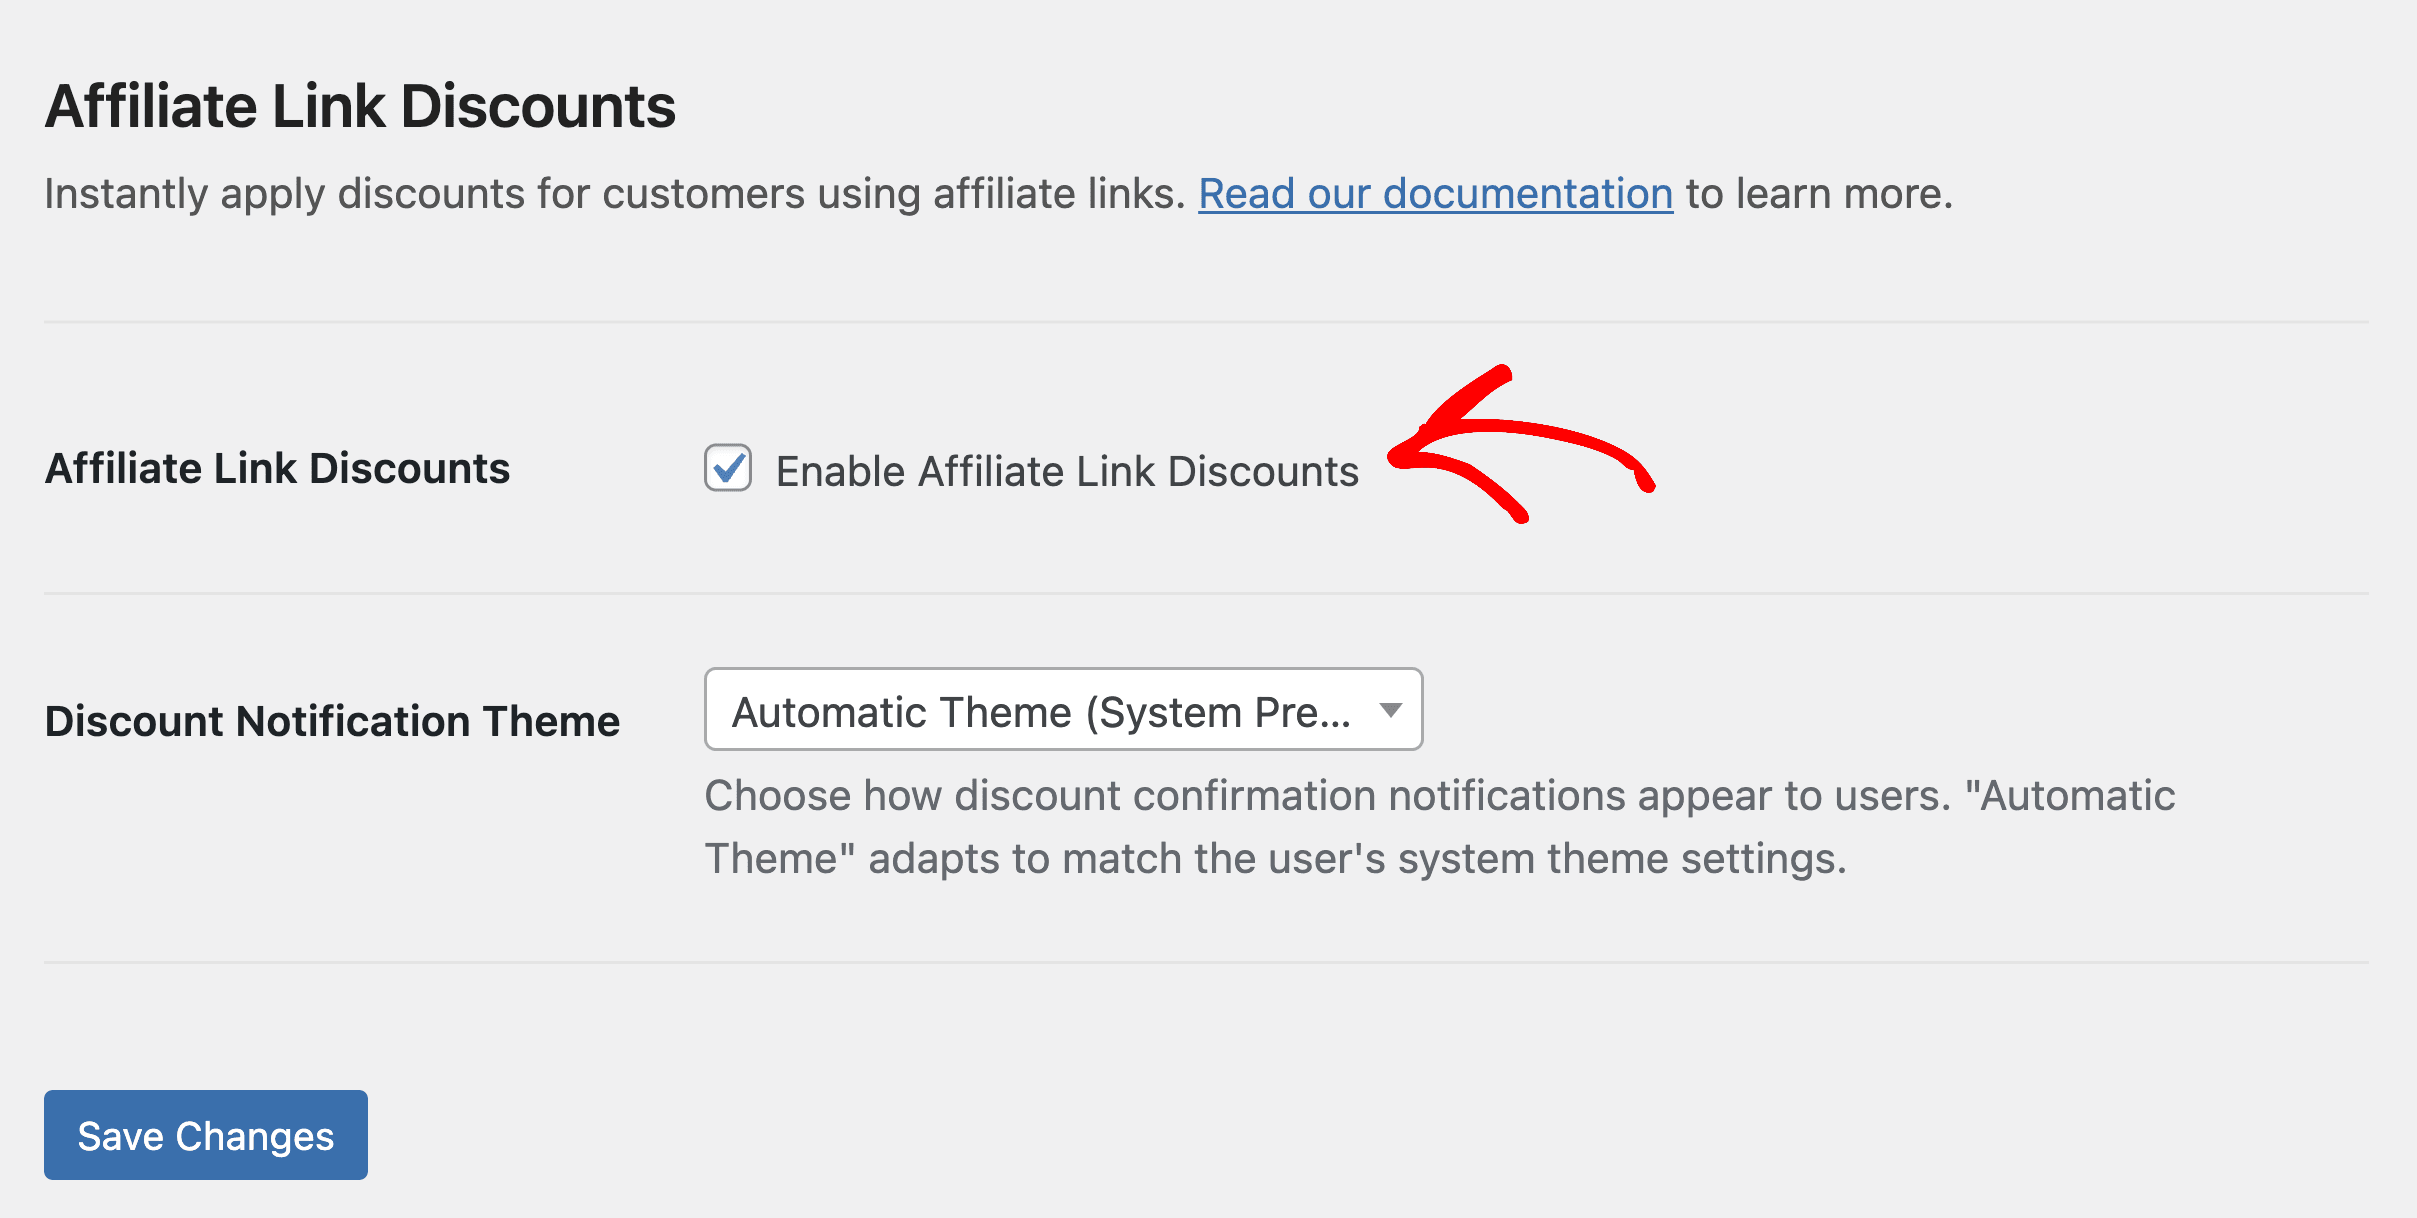 Check the Enable Affiliate Link Discounts box